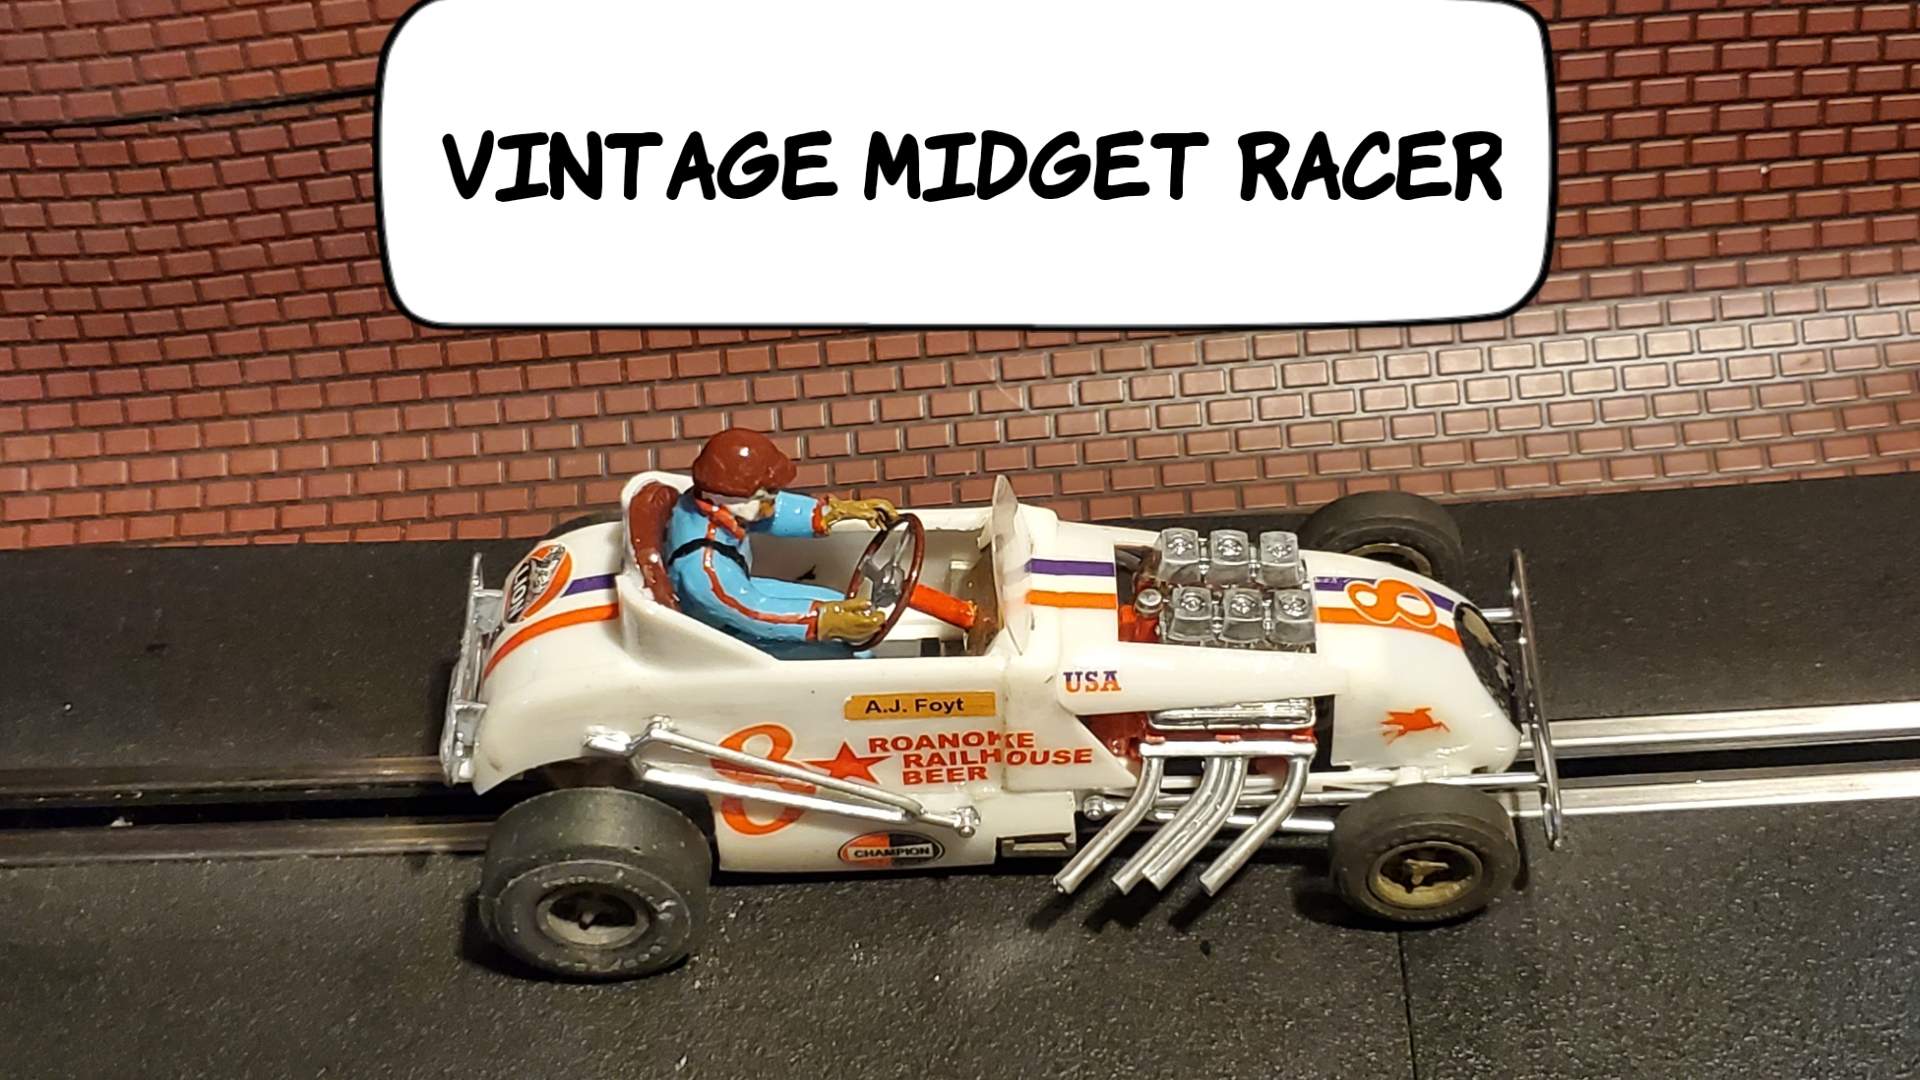 * Black Friday Super Sale, Save $50.00 vs. our Ebay Store Price * COX Midget Racing Special 1/24 Scale Slot Car 8